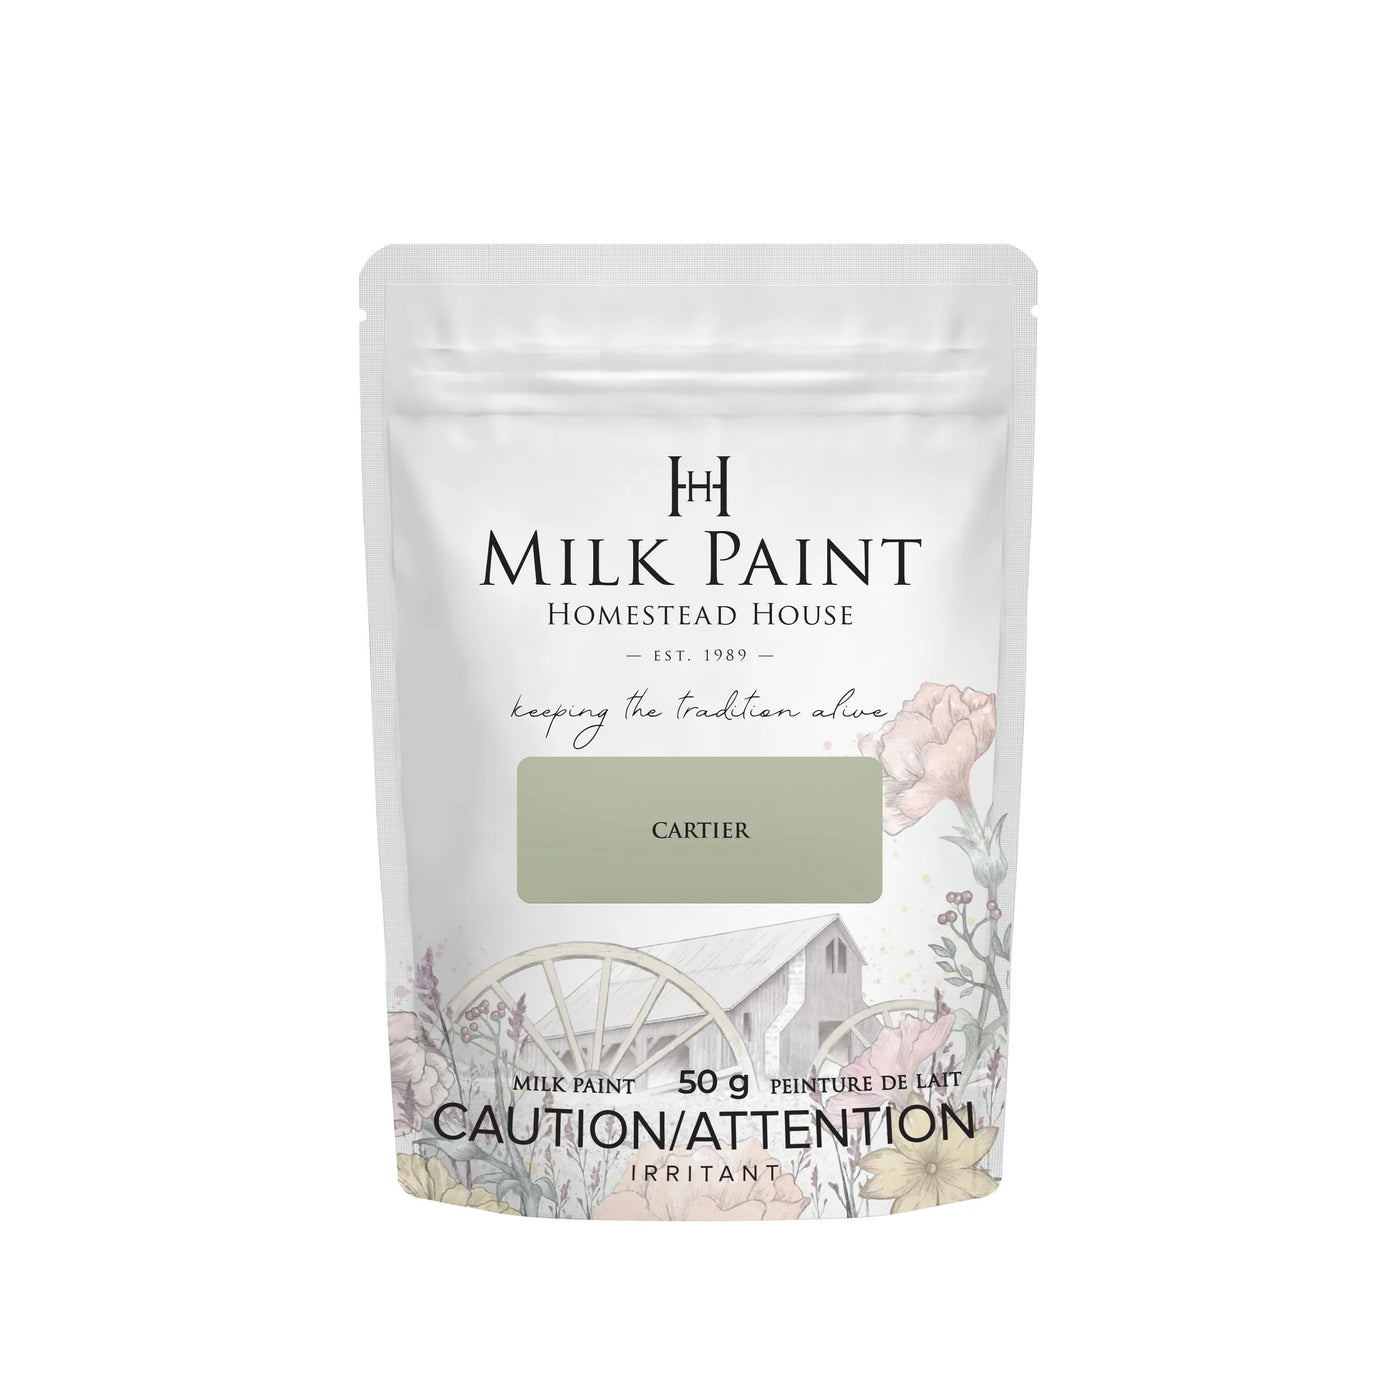 Homestead House Milk Paint - Cartier 50g container